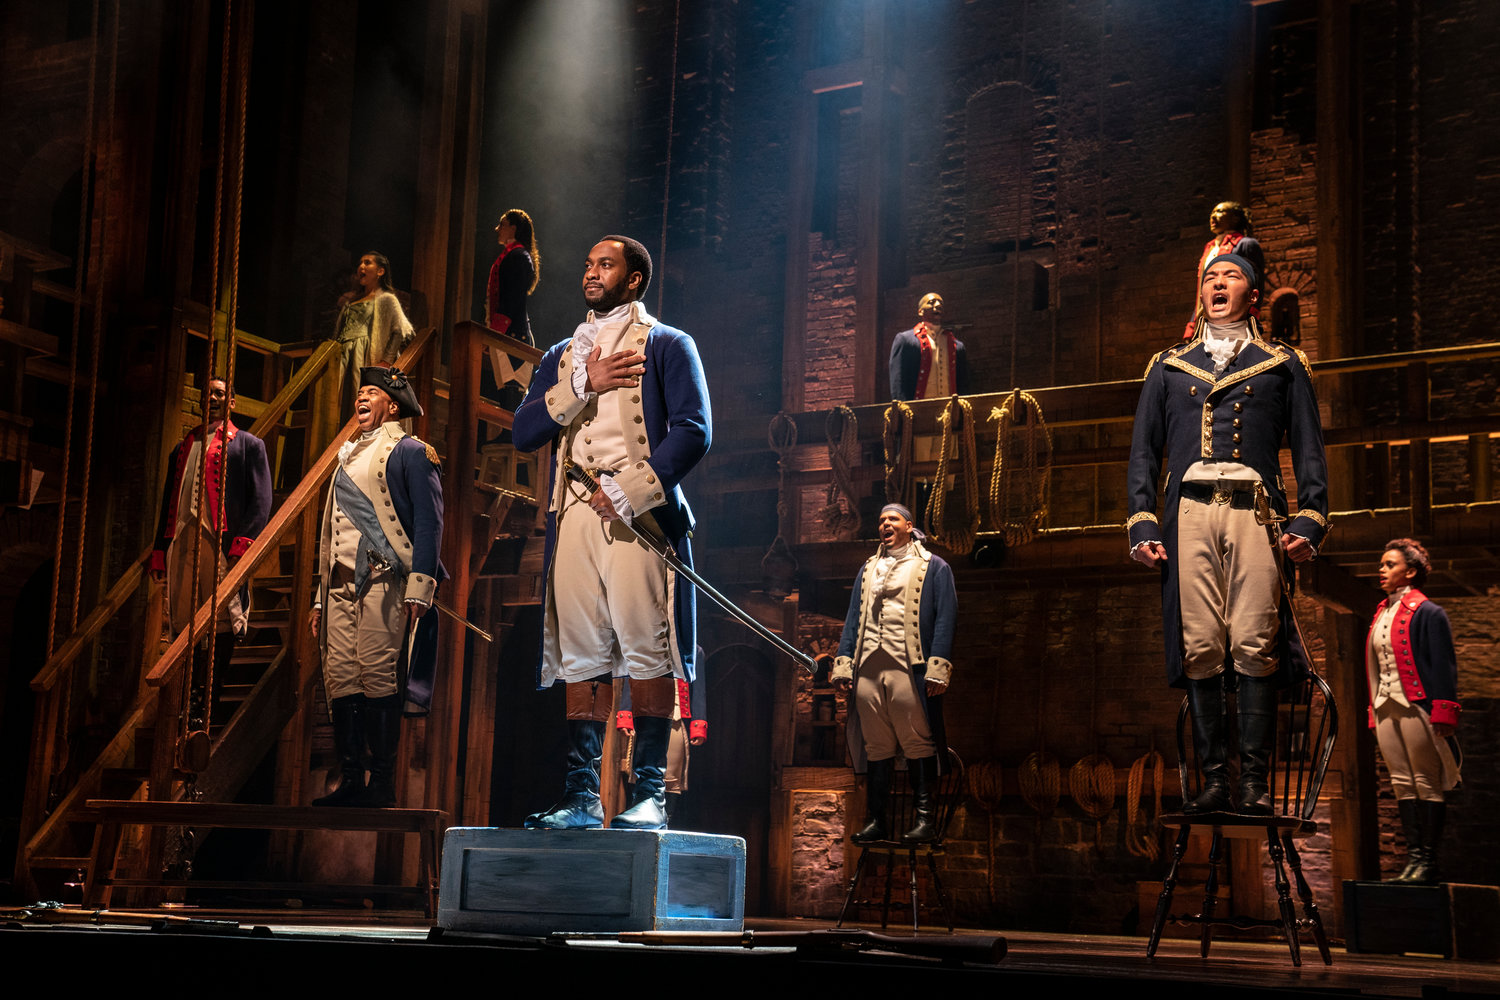 More than $3.3 million in ticket sales were generated by the performance run of "Hamilton" at Juanita K. Hammons Hall for the Performing Arts.